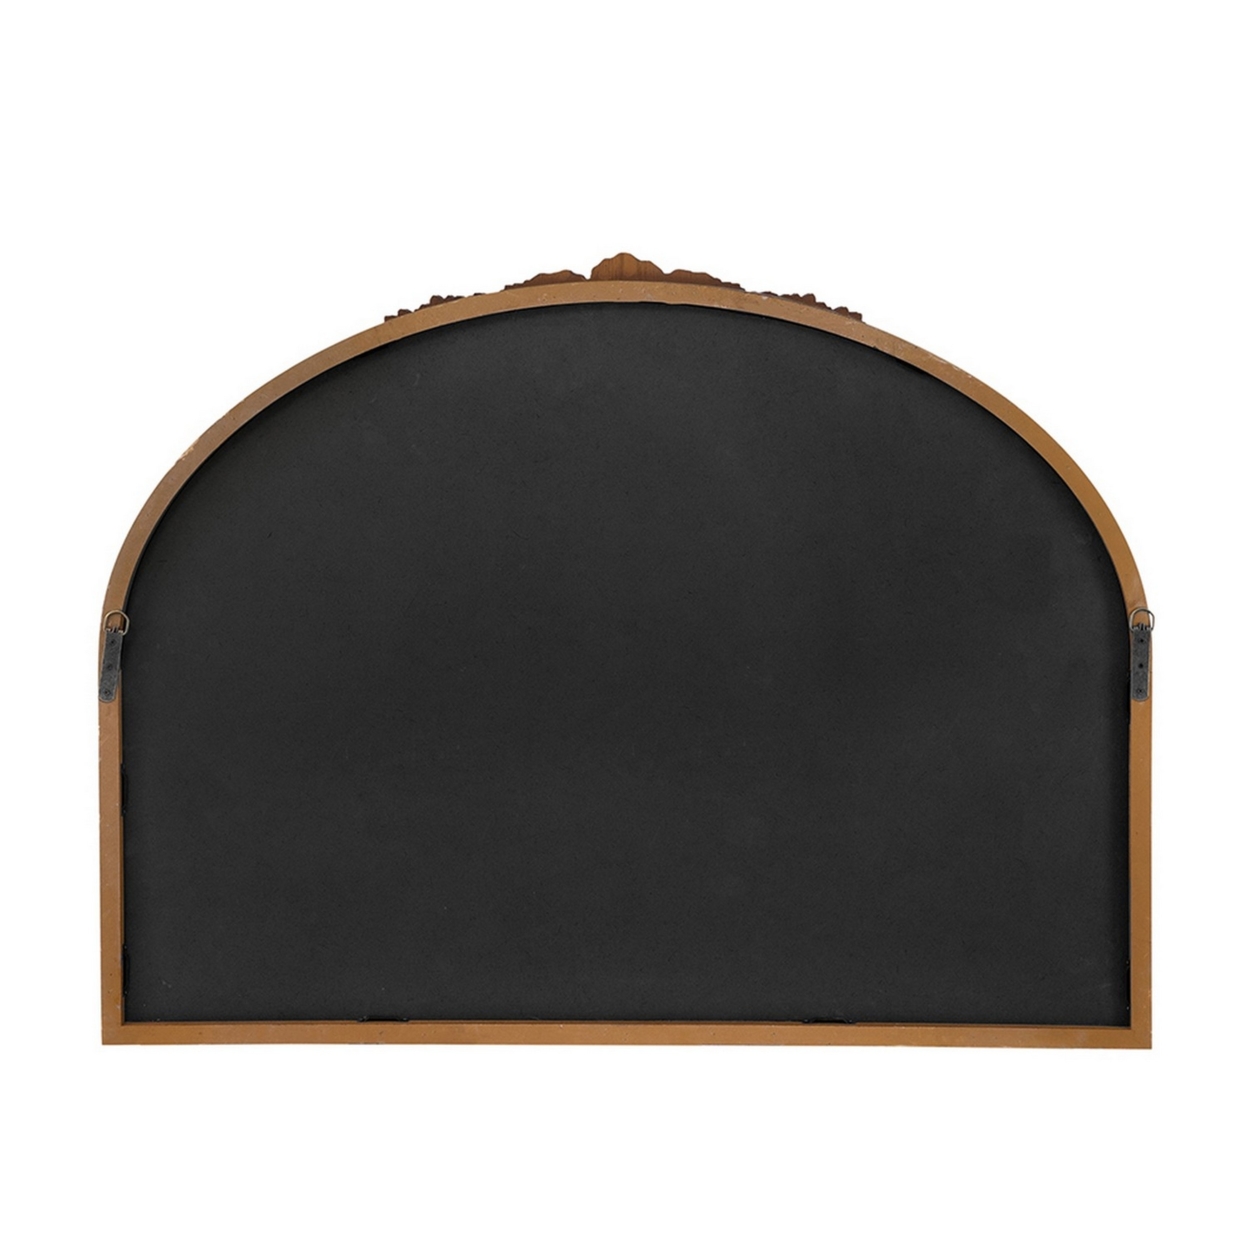 Eel 40 Inch Wall Mirror, Espresso Brown Arched Wood Frame, Hand Carved Rose- Saltoro Sherpi